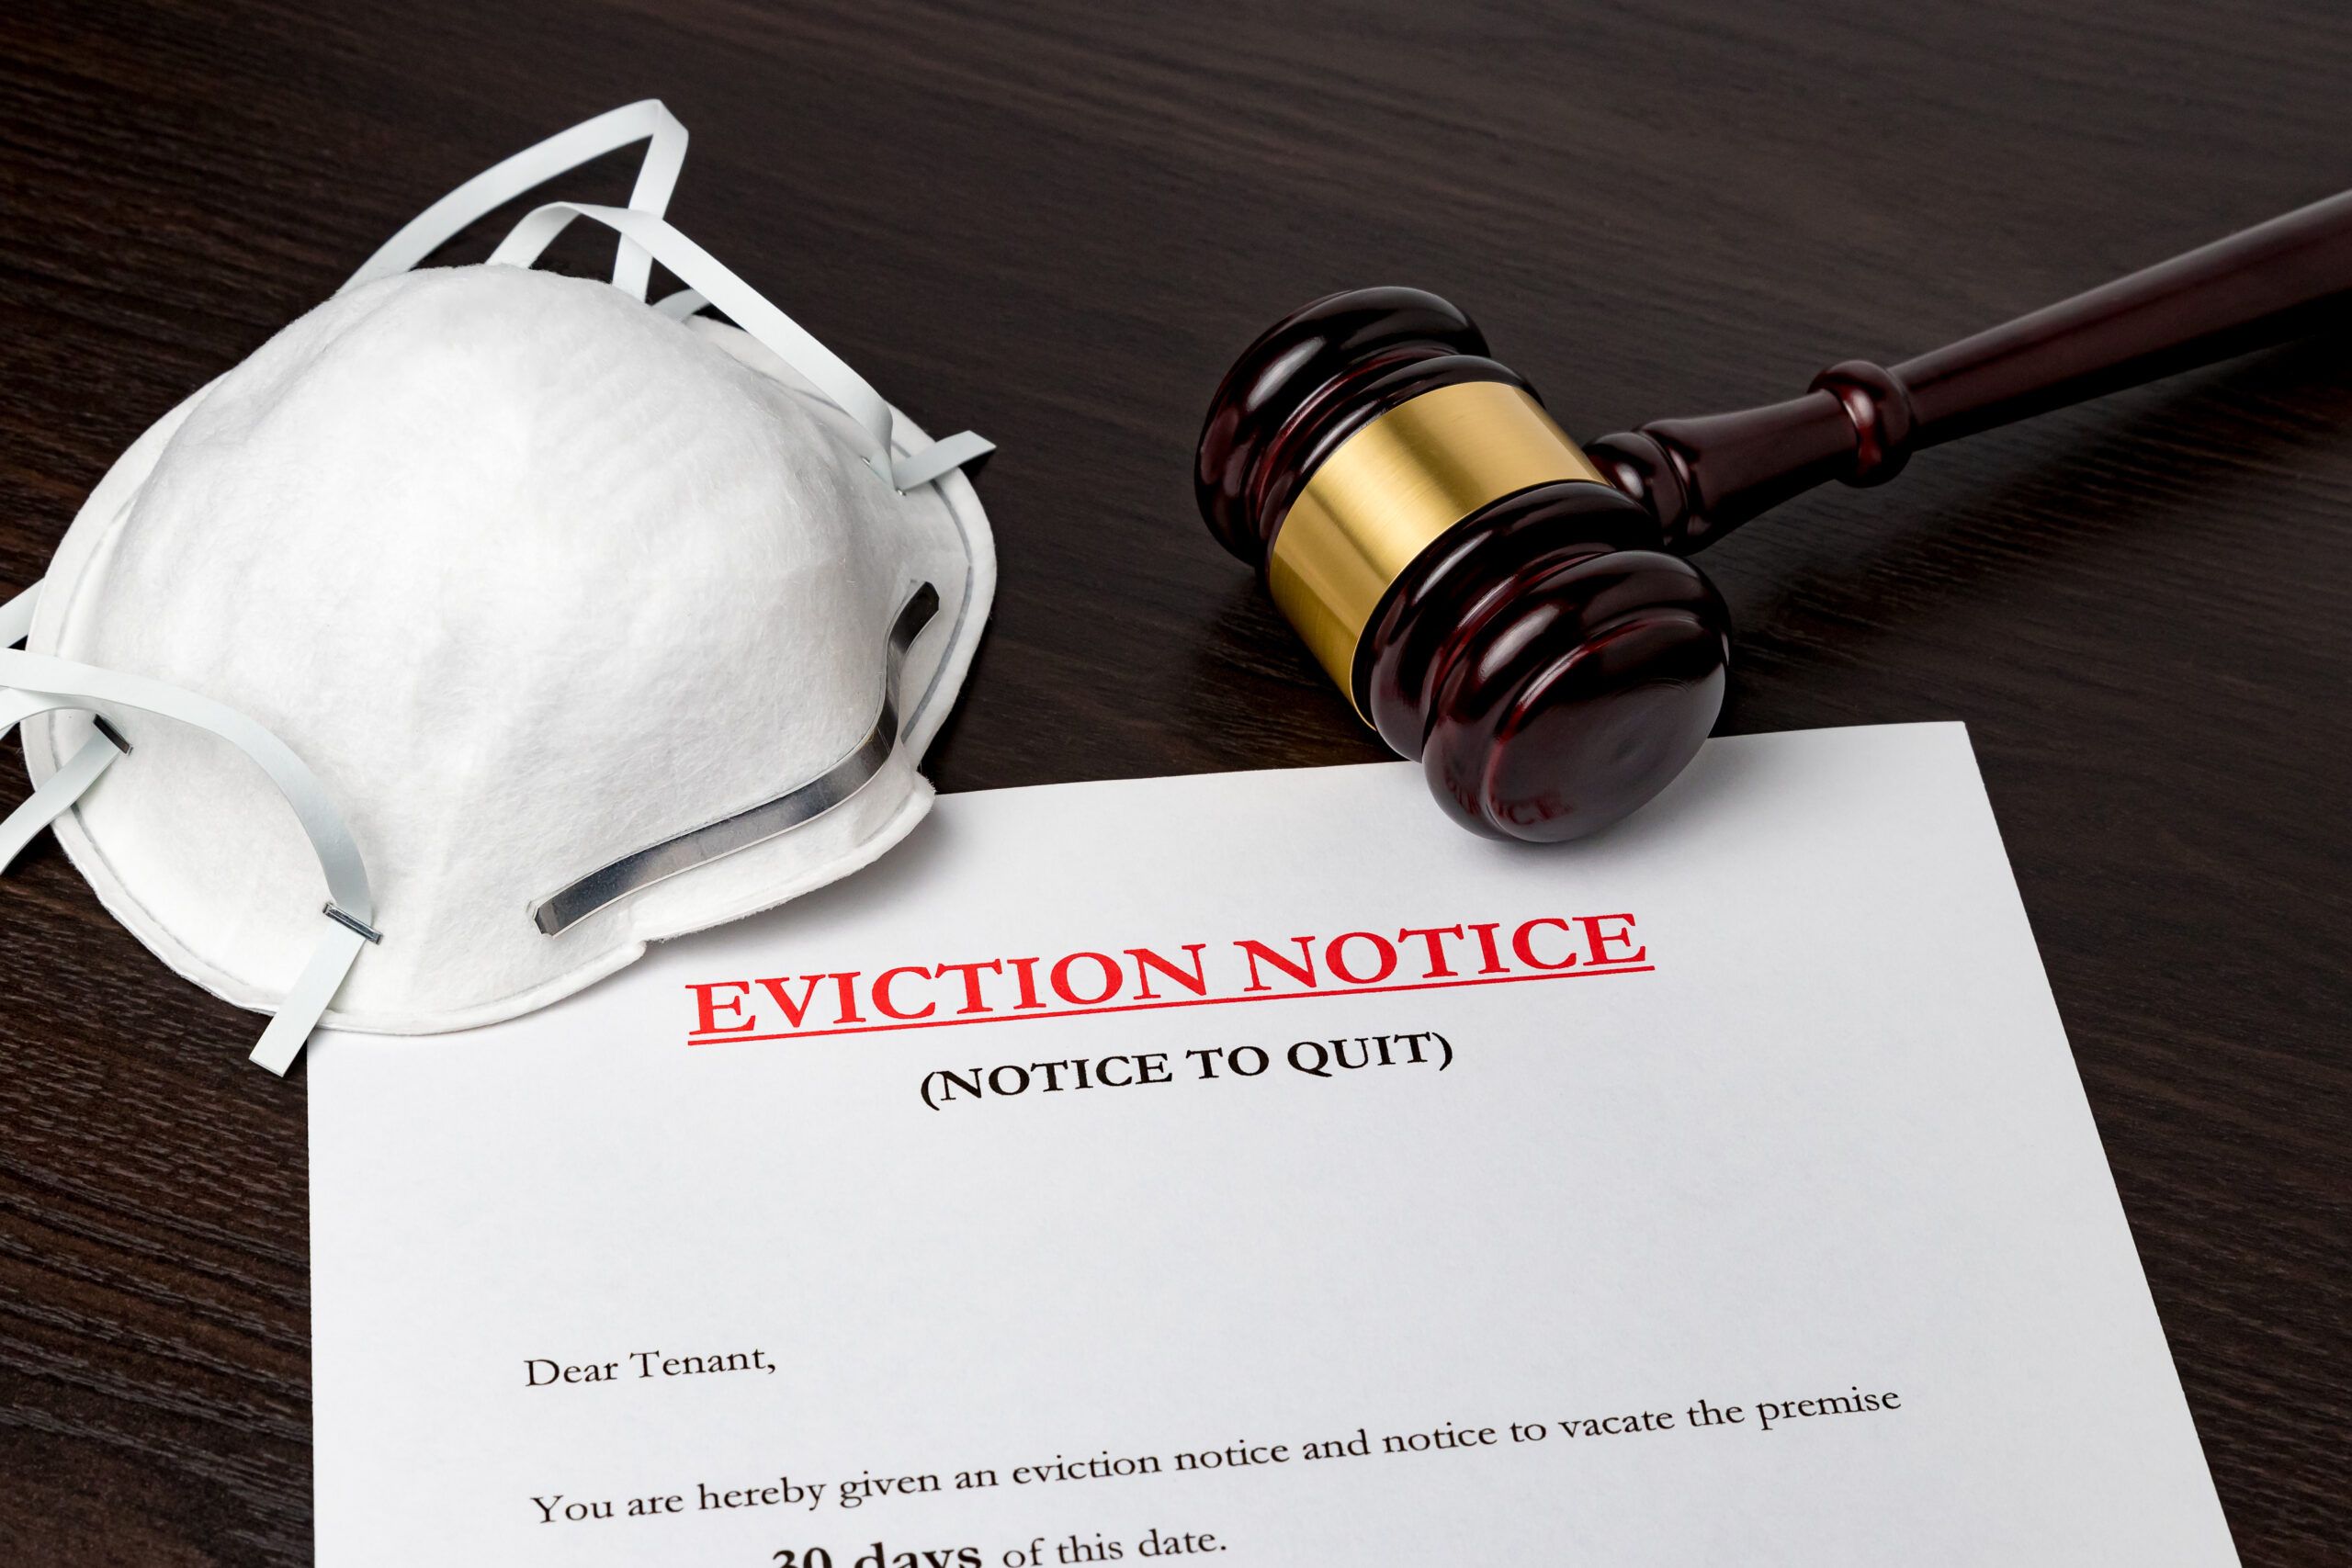 A stock photograph of an eviction notice next to a gavel and a mask.